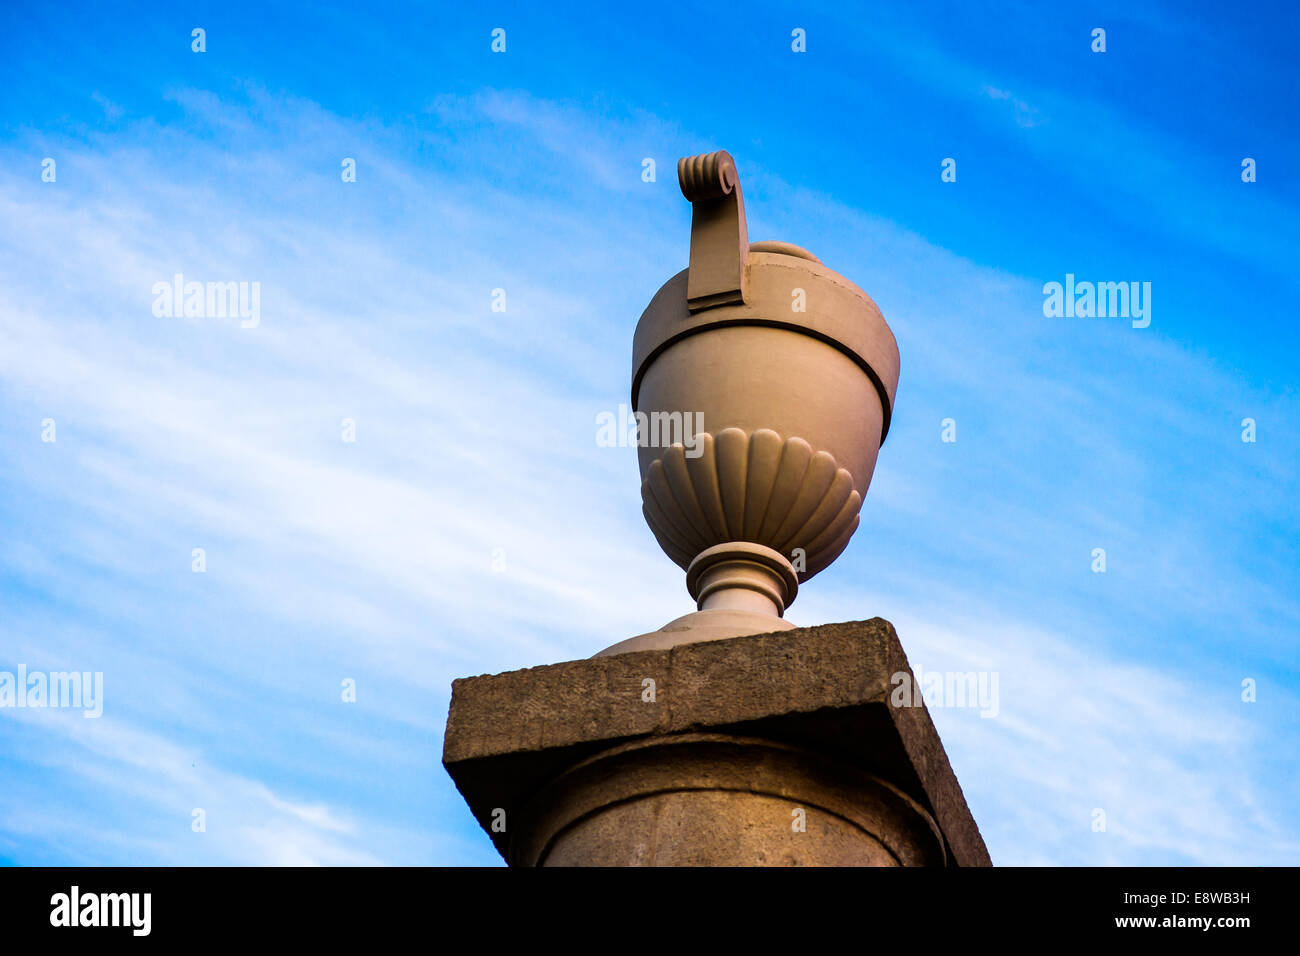 Eternity. A decorative urn against the background of endless sky with cirrus clouds Stock Photo